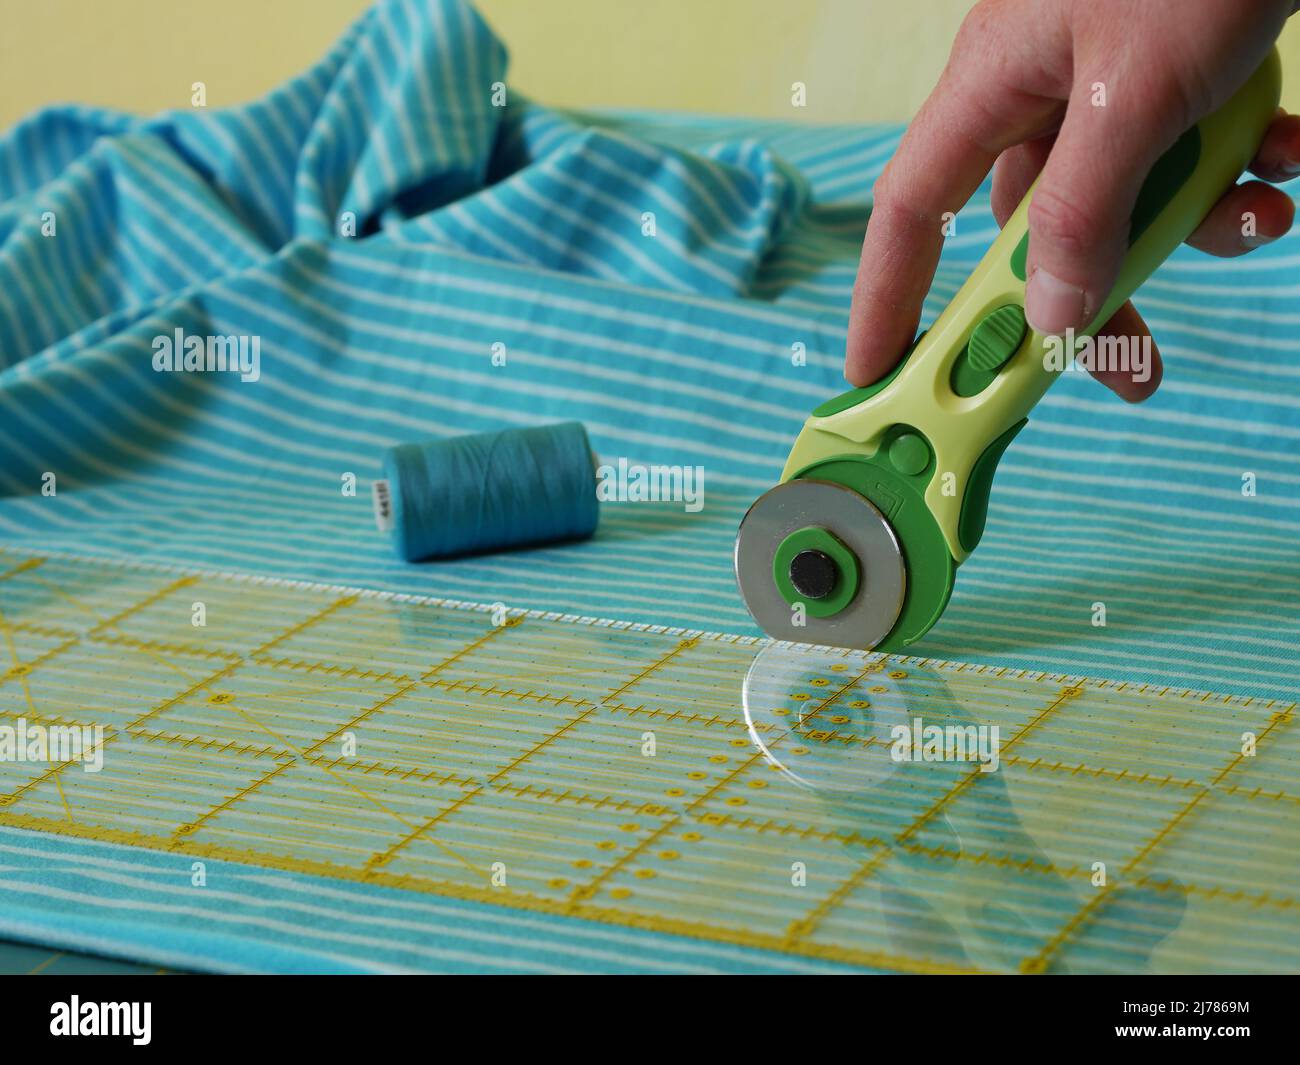 close up of cutting fabric with rotary cutter Stock Photo - Alamy